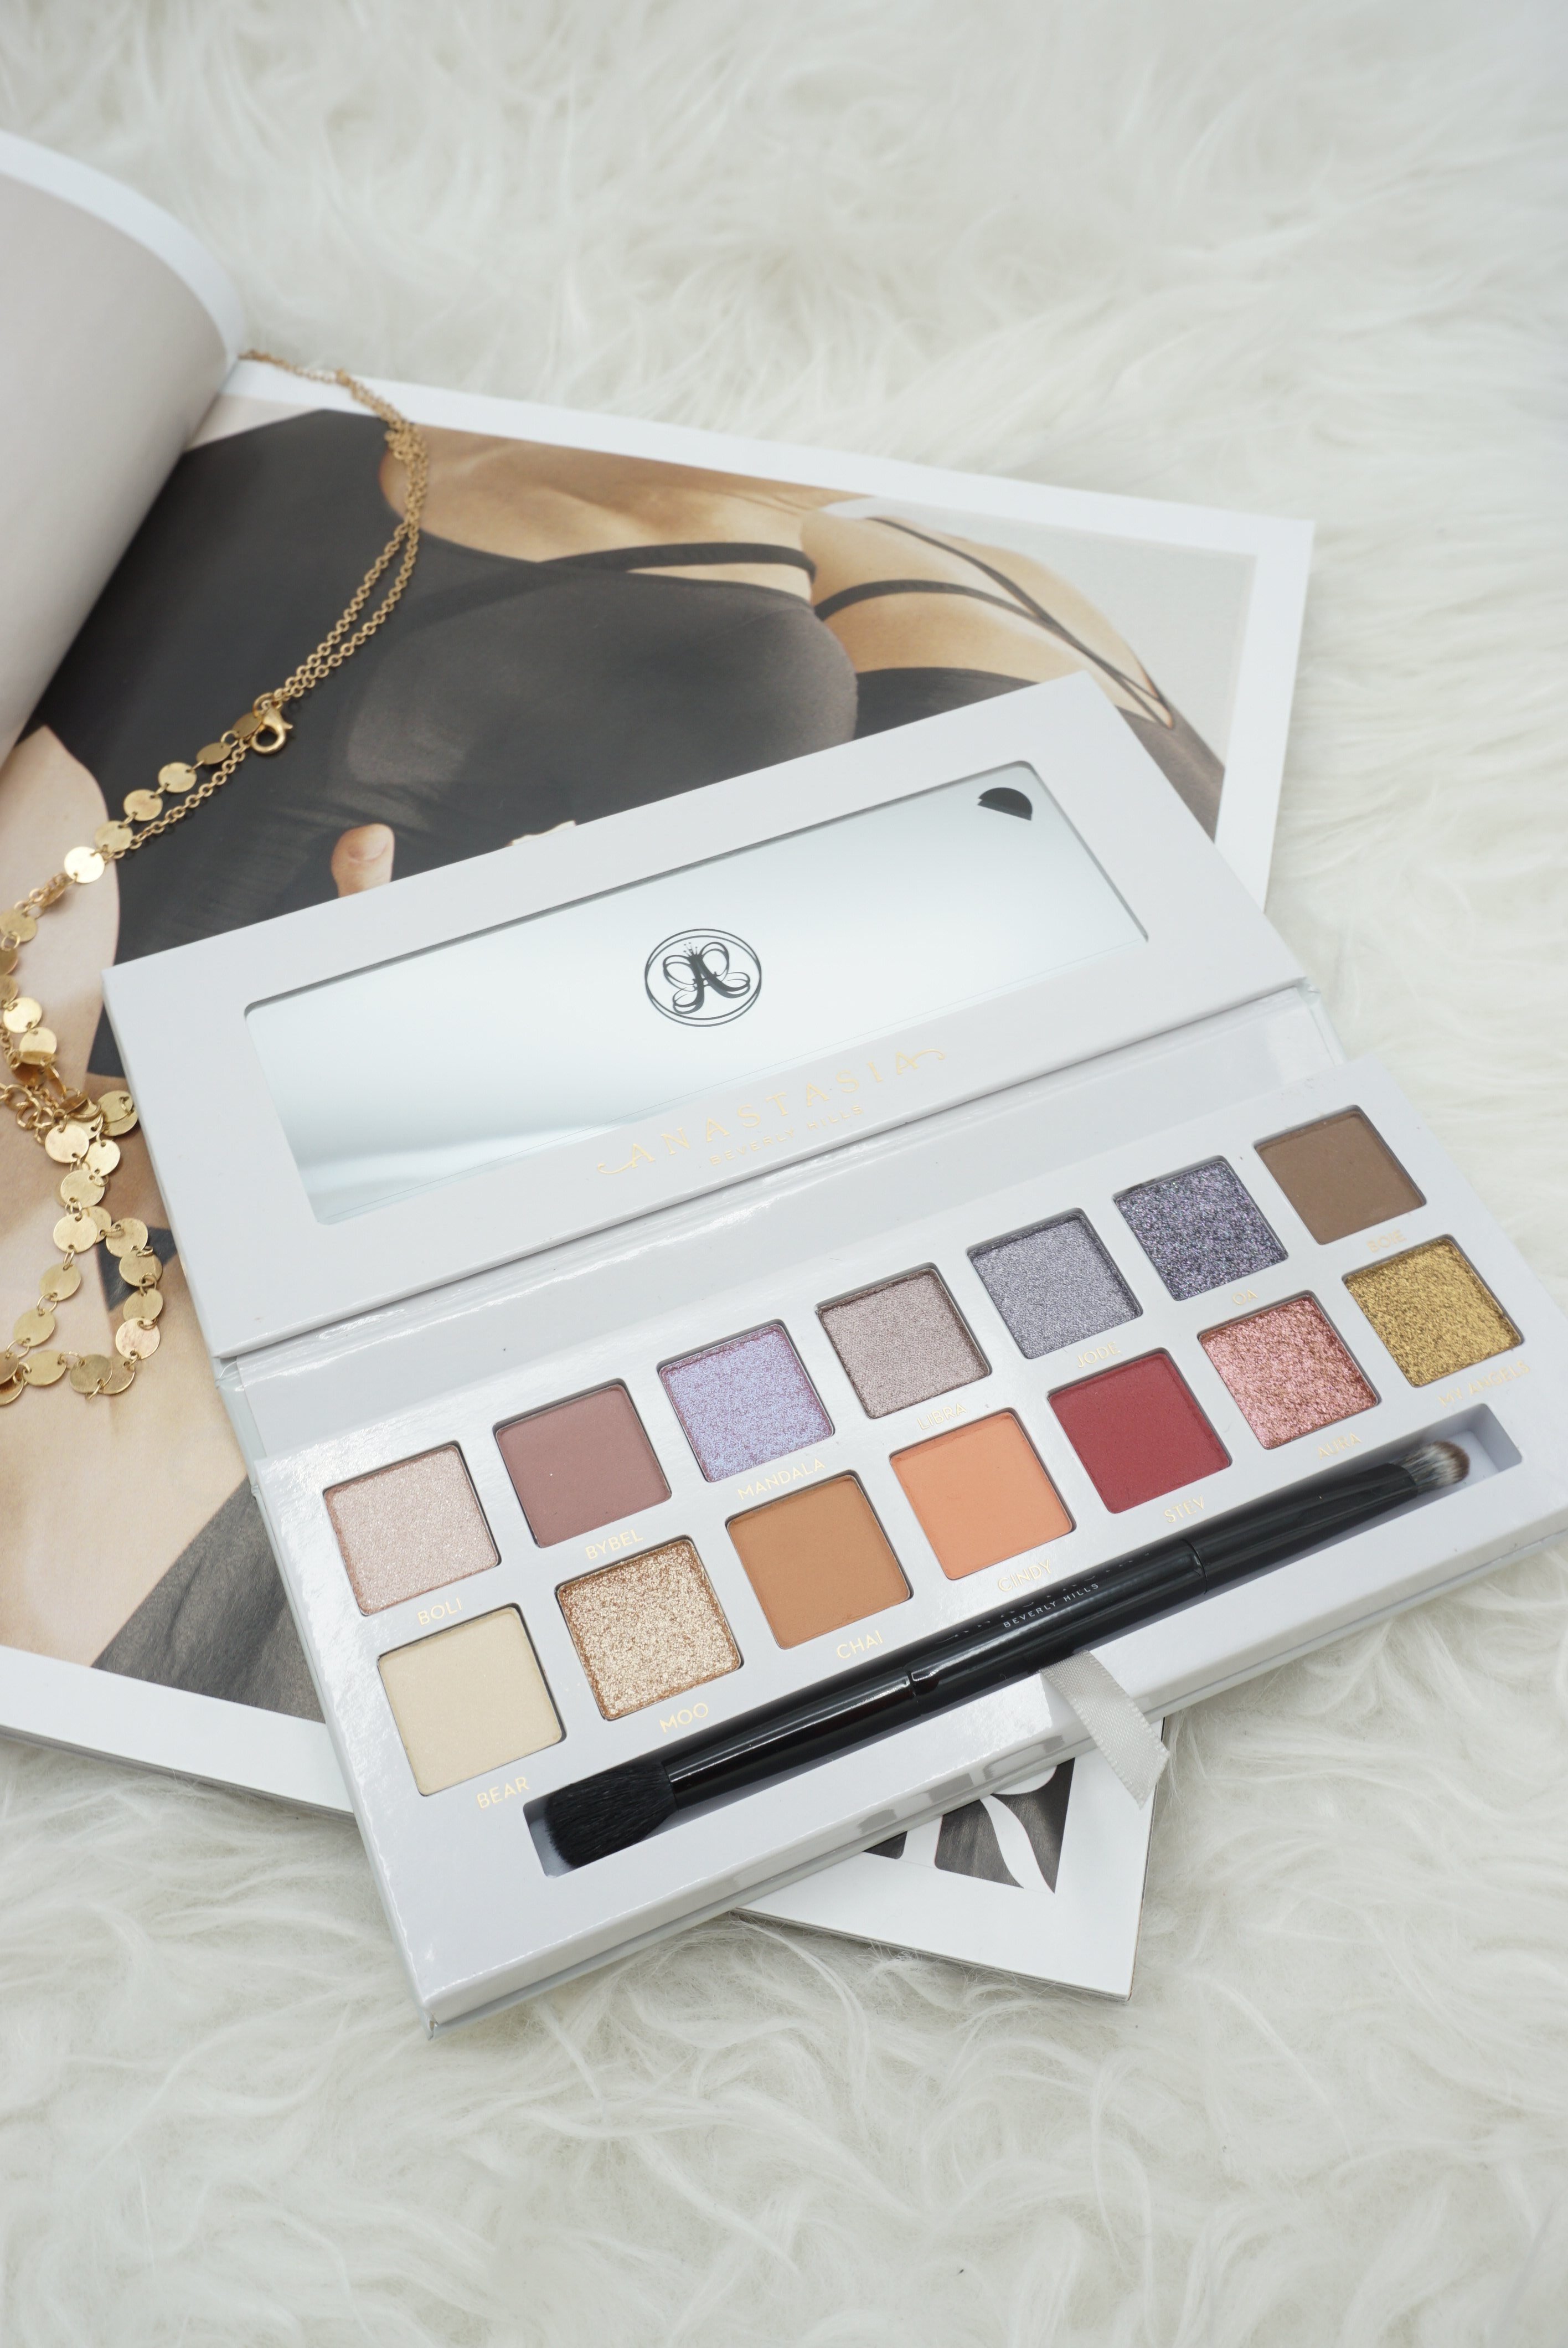 Anastasia Beverly Hills x Carli Bybel Palette | Review & Swatches